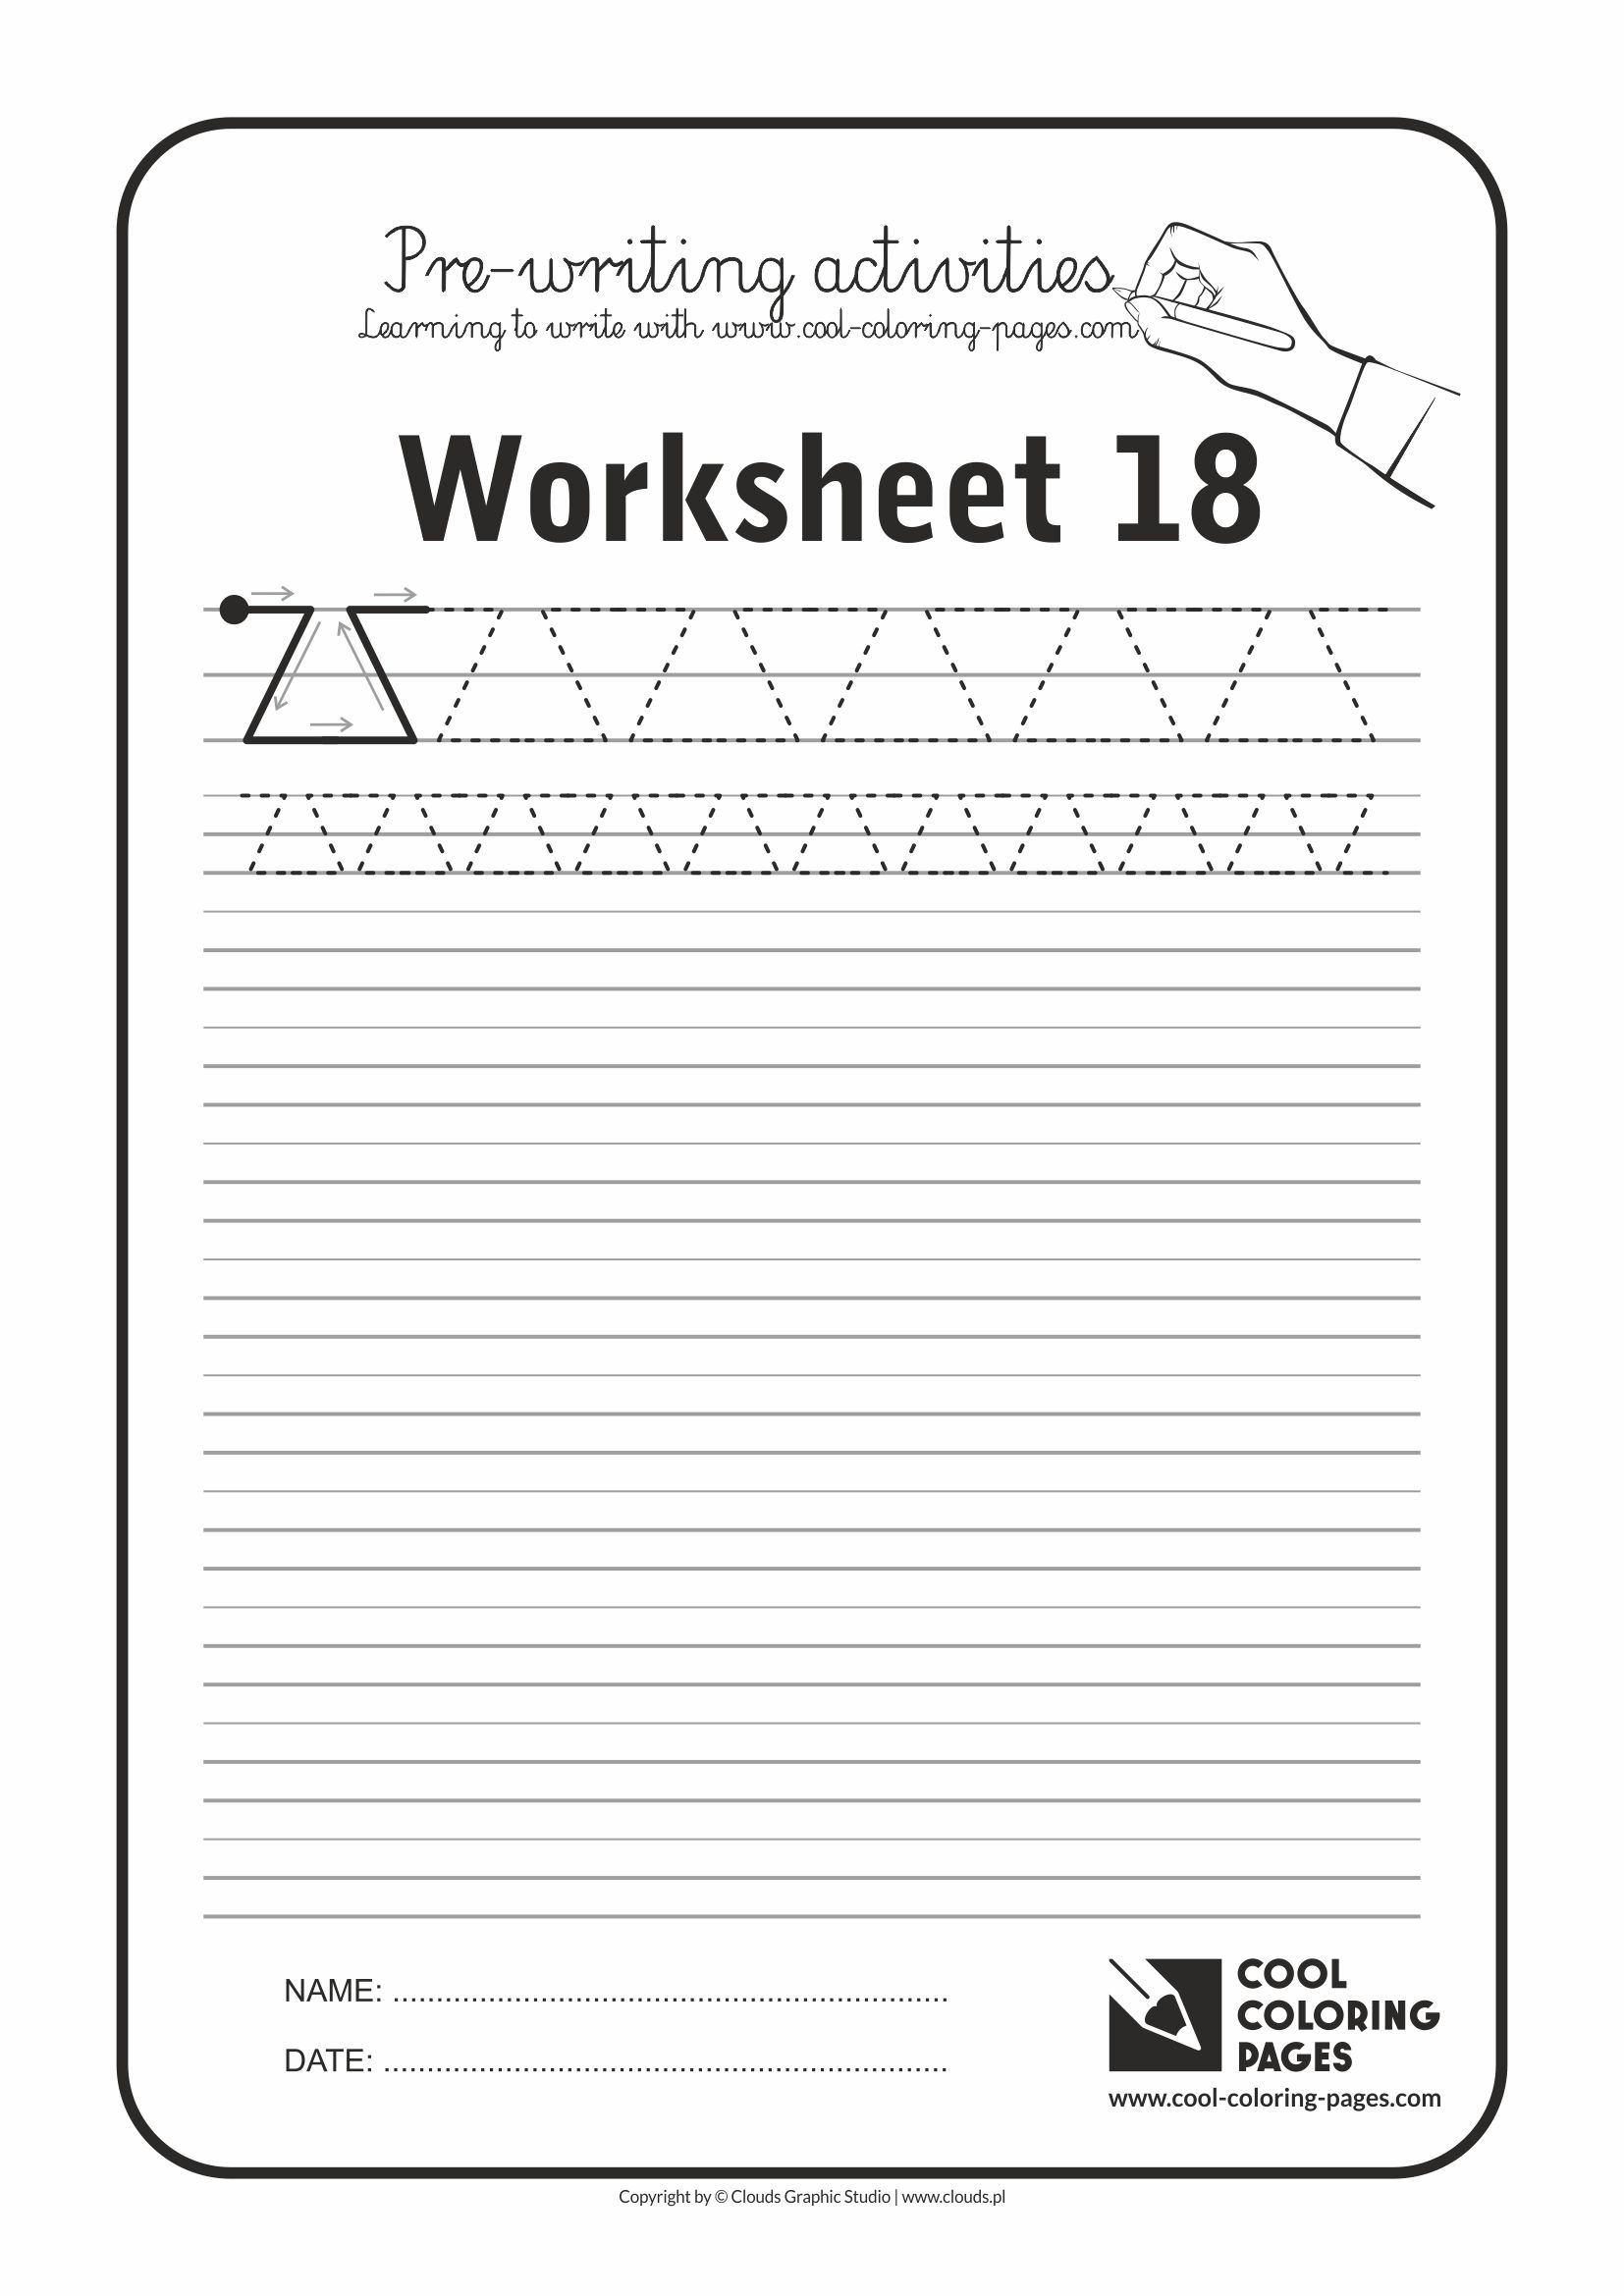 Cool Coloring Pages / Pre-writing activities / Worksheet no.18